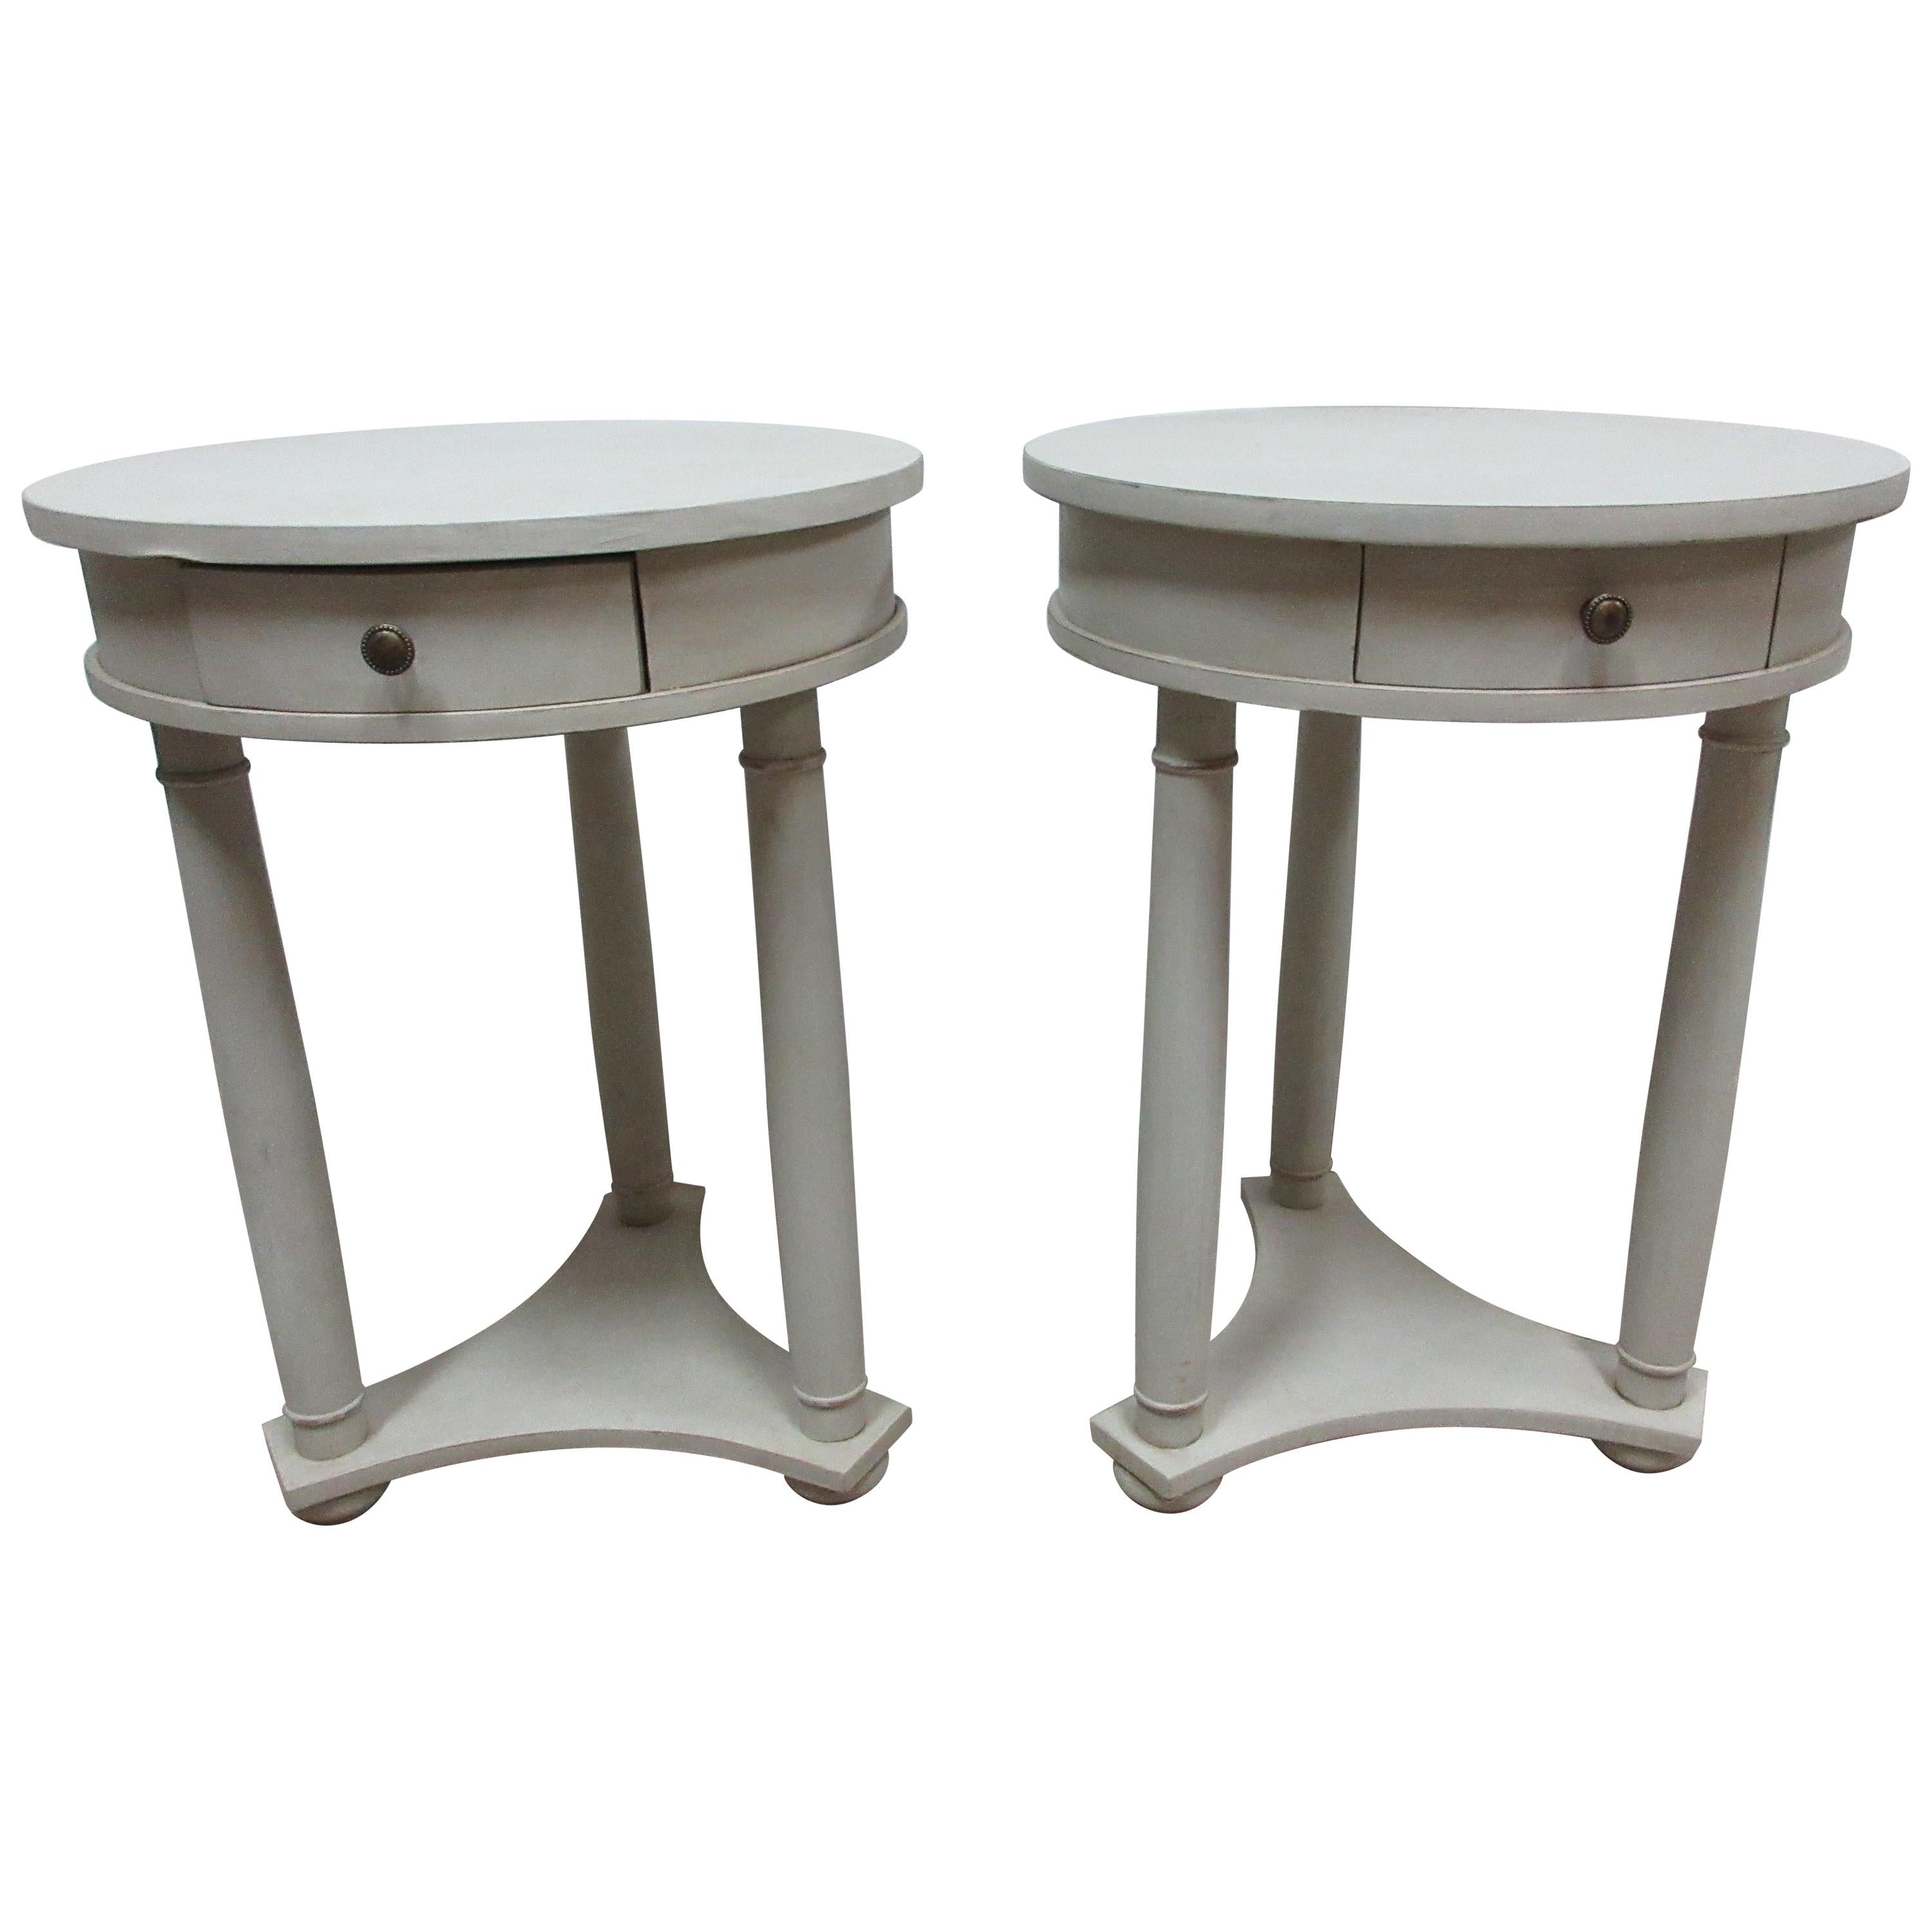 2 Round Tables Side Tables